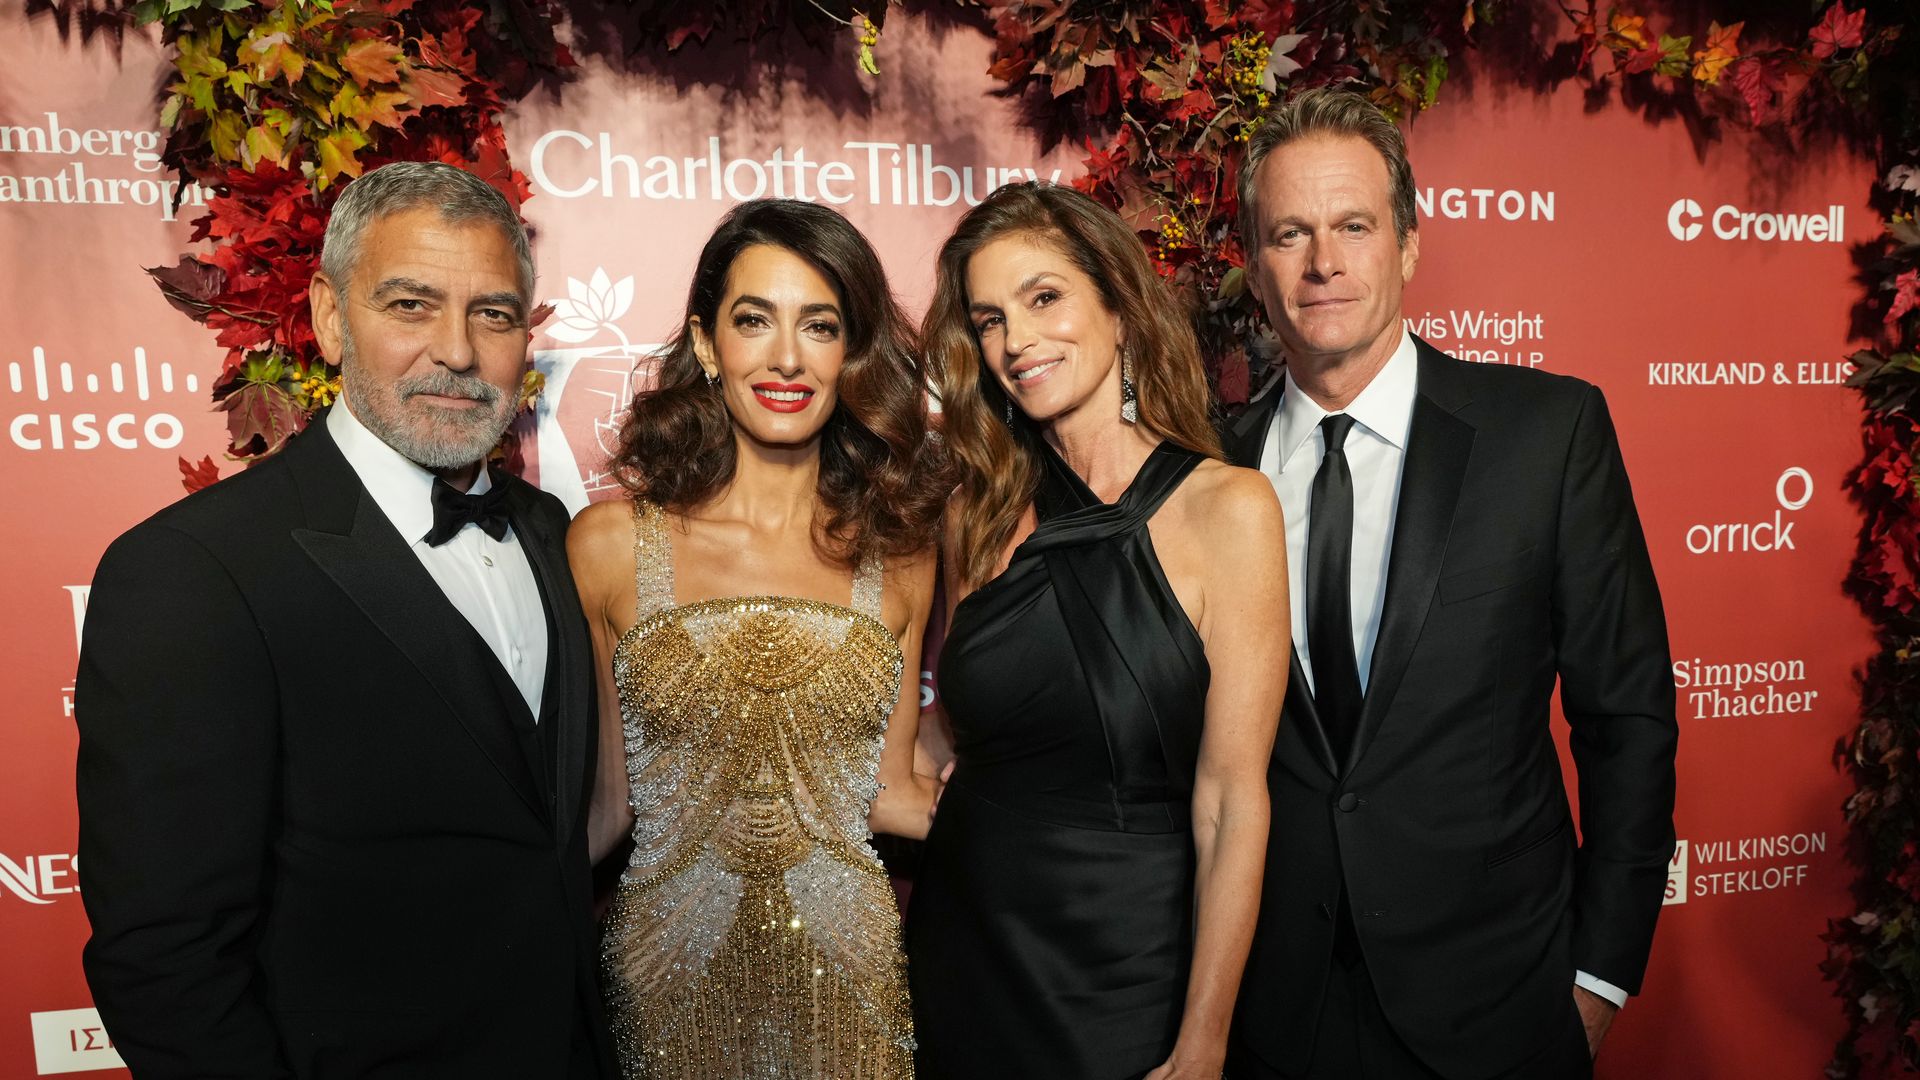 Cindy Crawford's family connection to George and Amal Clooney spans 30 years, two holiday homes and a $1million gift